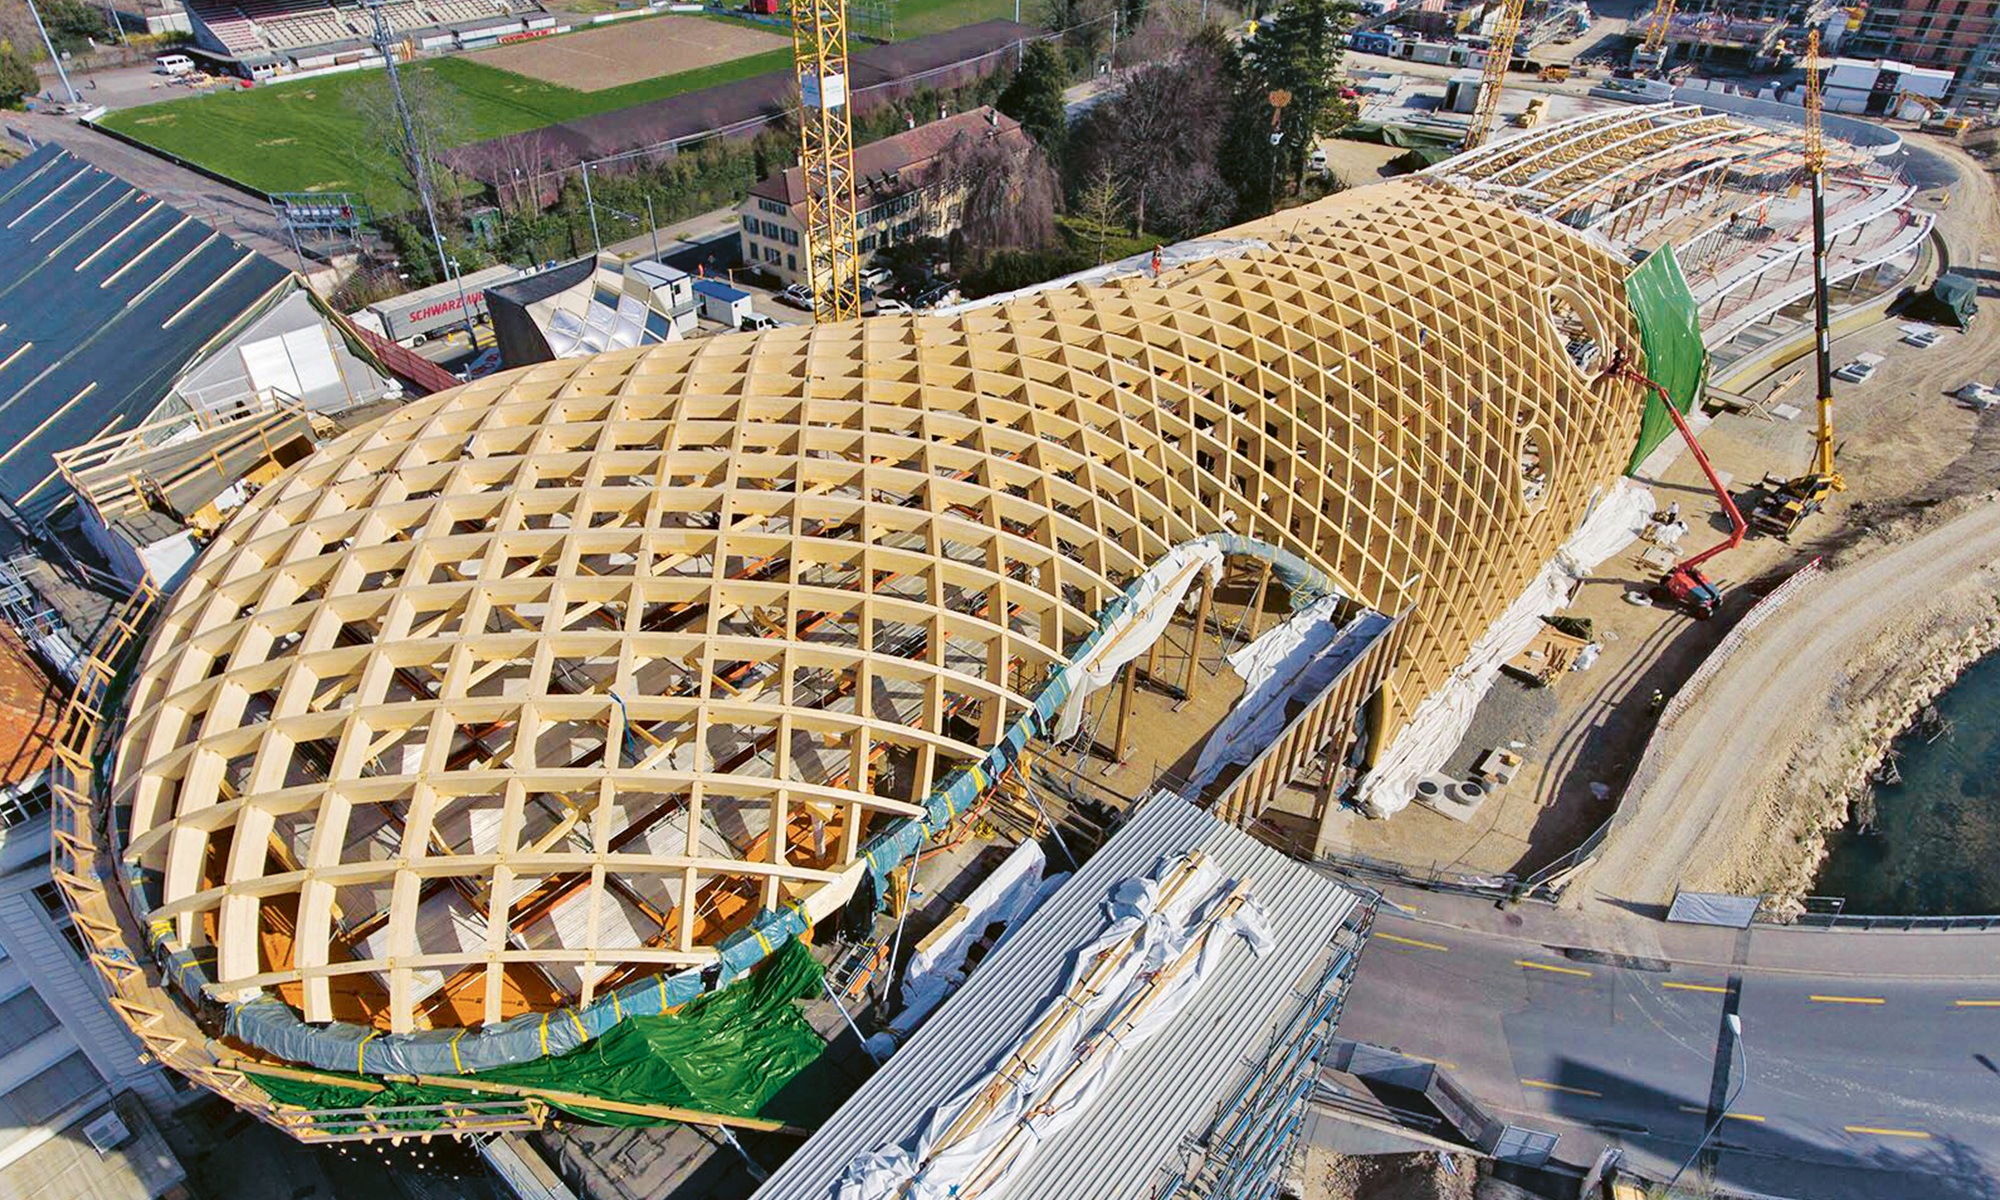 Bird’s eye view of the timber frame construction for Swatch’s main building. Free Form timber construction of the highest precision.